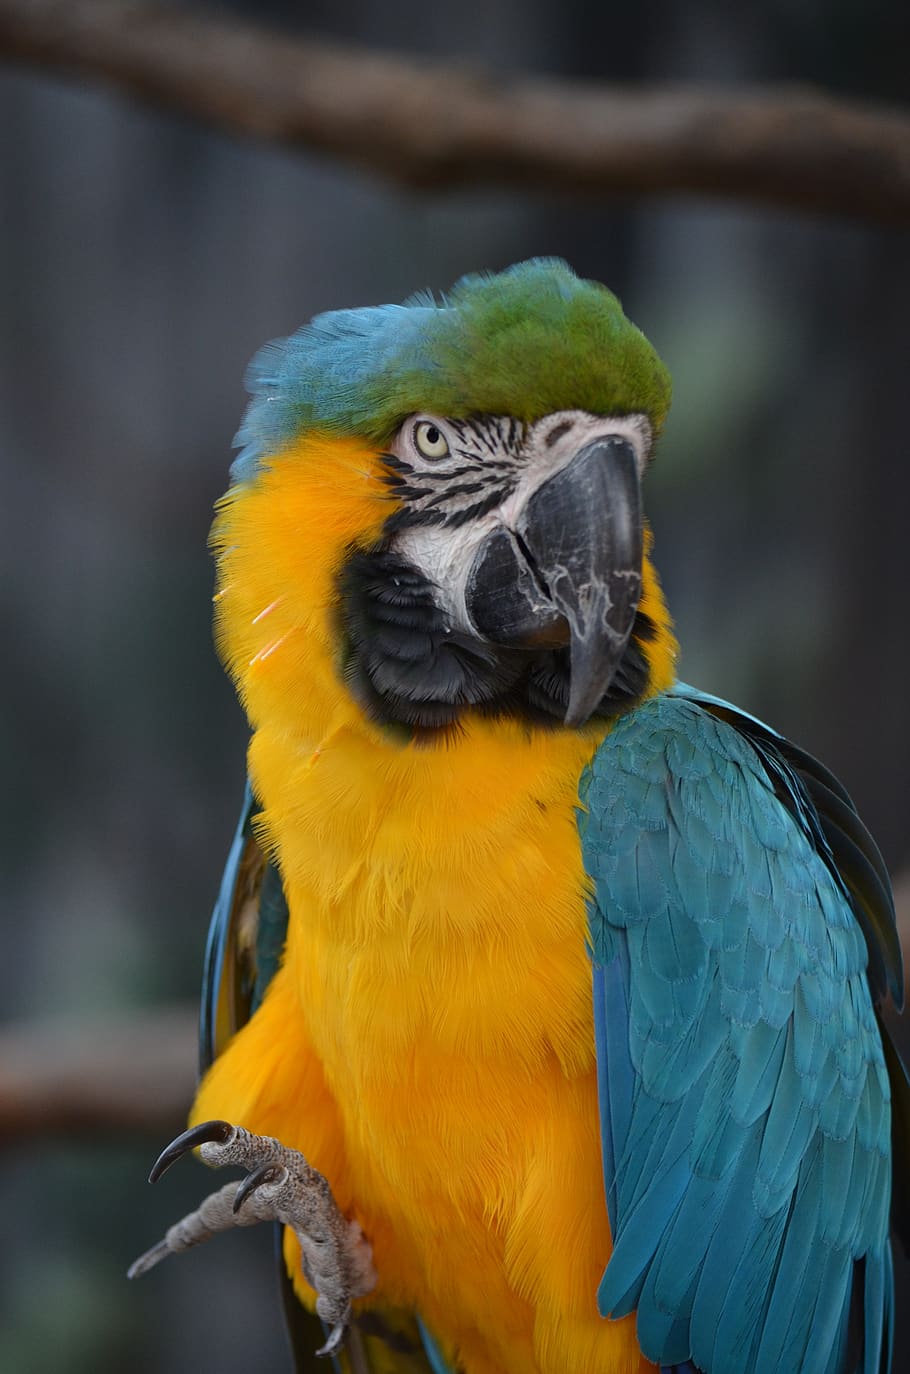 Bird, Macaw, Parrot, Colorful, Plumage, Exotic, Nature, - Macaw ...